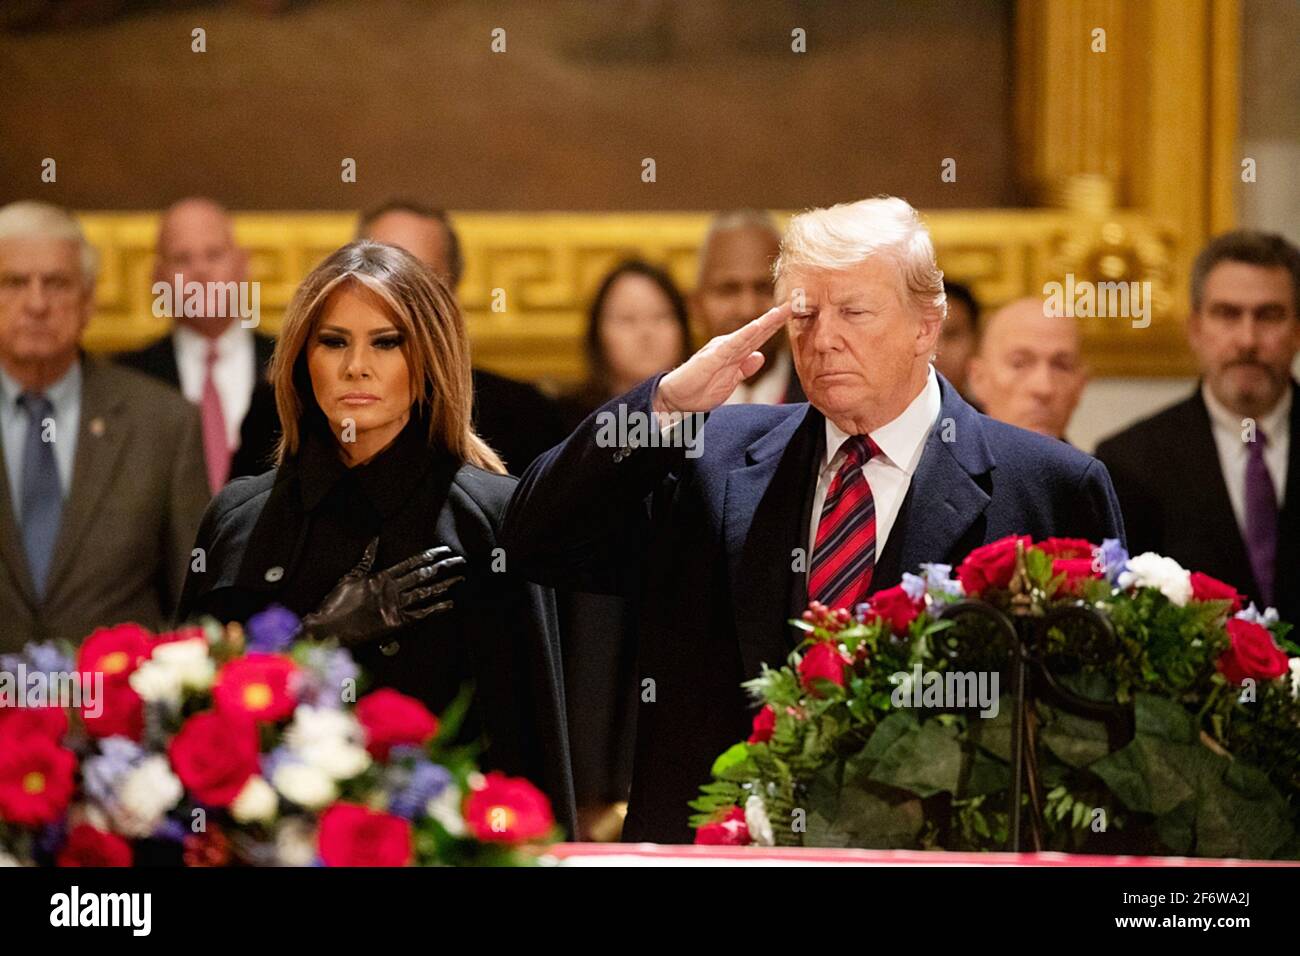 WASHINGTON (Dec. 3, 2017) President Donald J. Trump and first lady Melania Trump pay respects to former President George H. W. Bush as Bush lies in Stock Photo